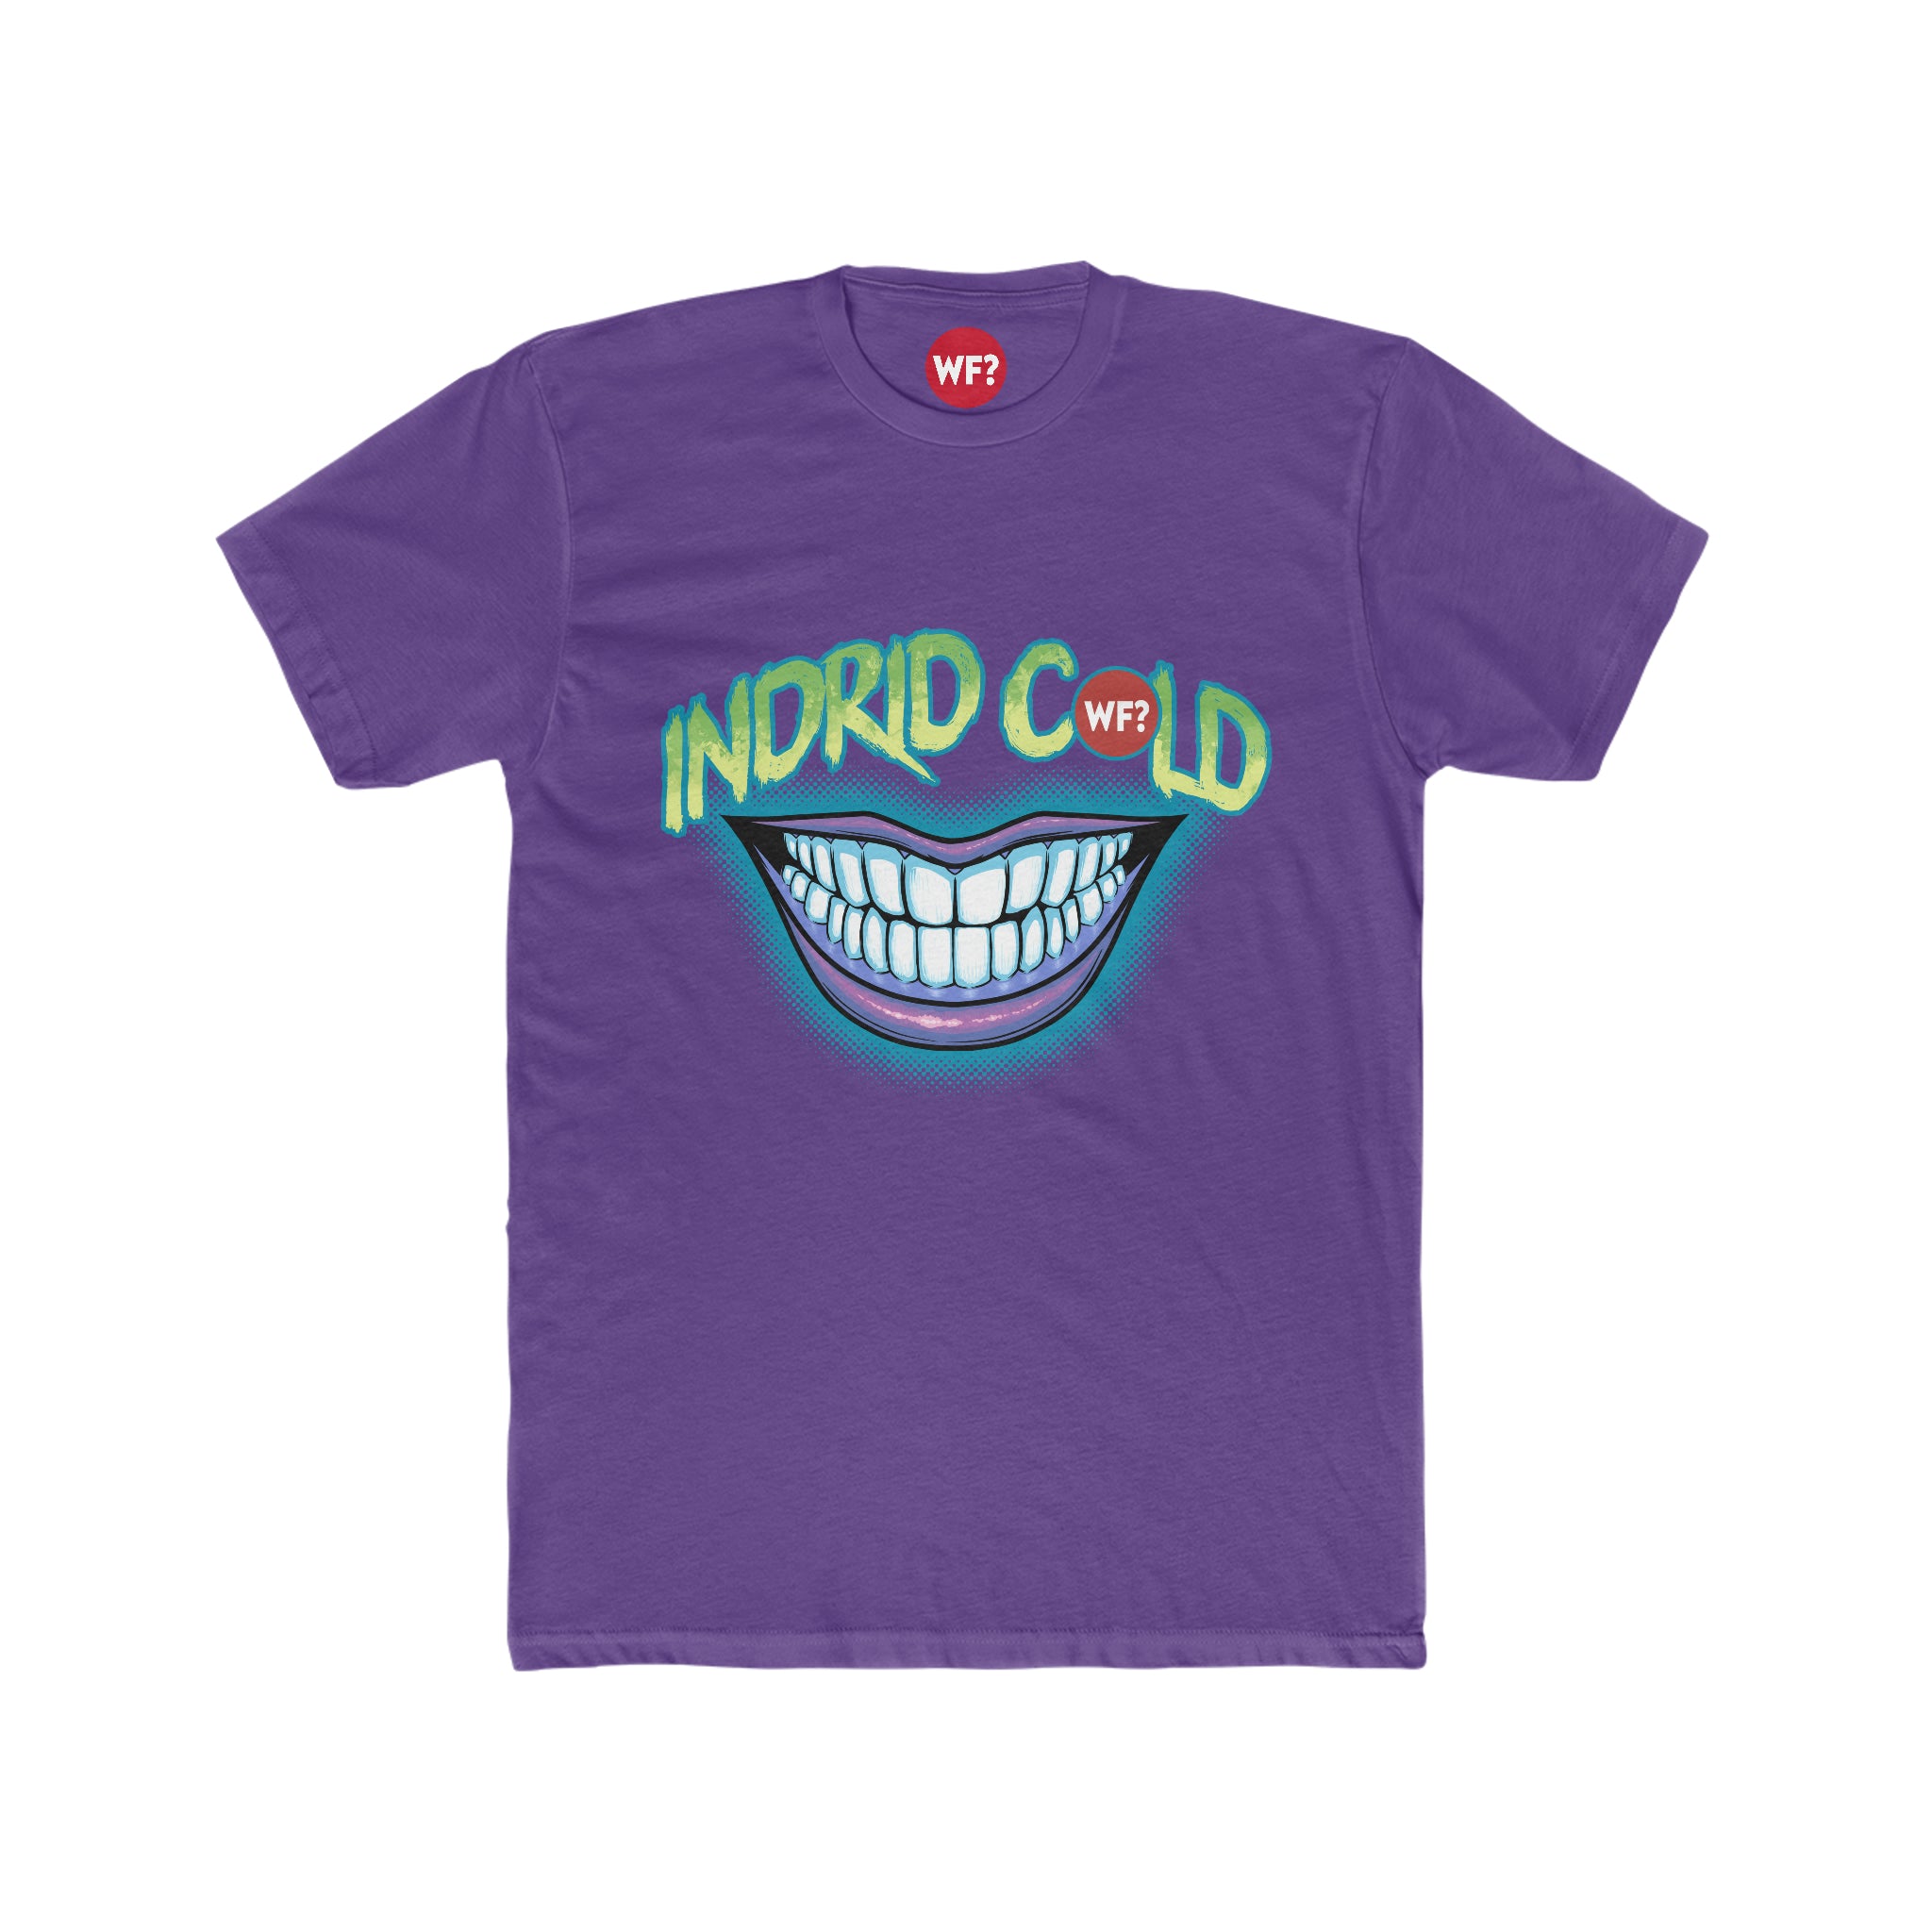 Buy solid-purple-rush Indrid Cold Limited T-Shirt